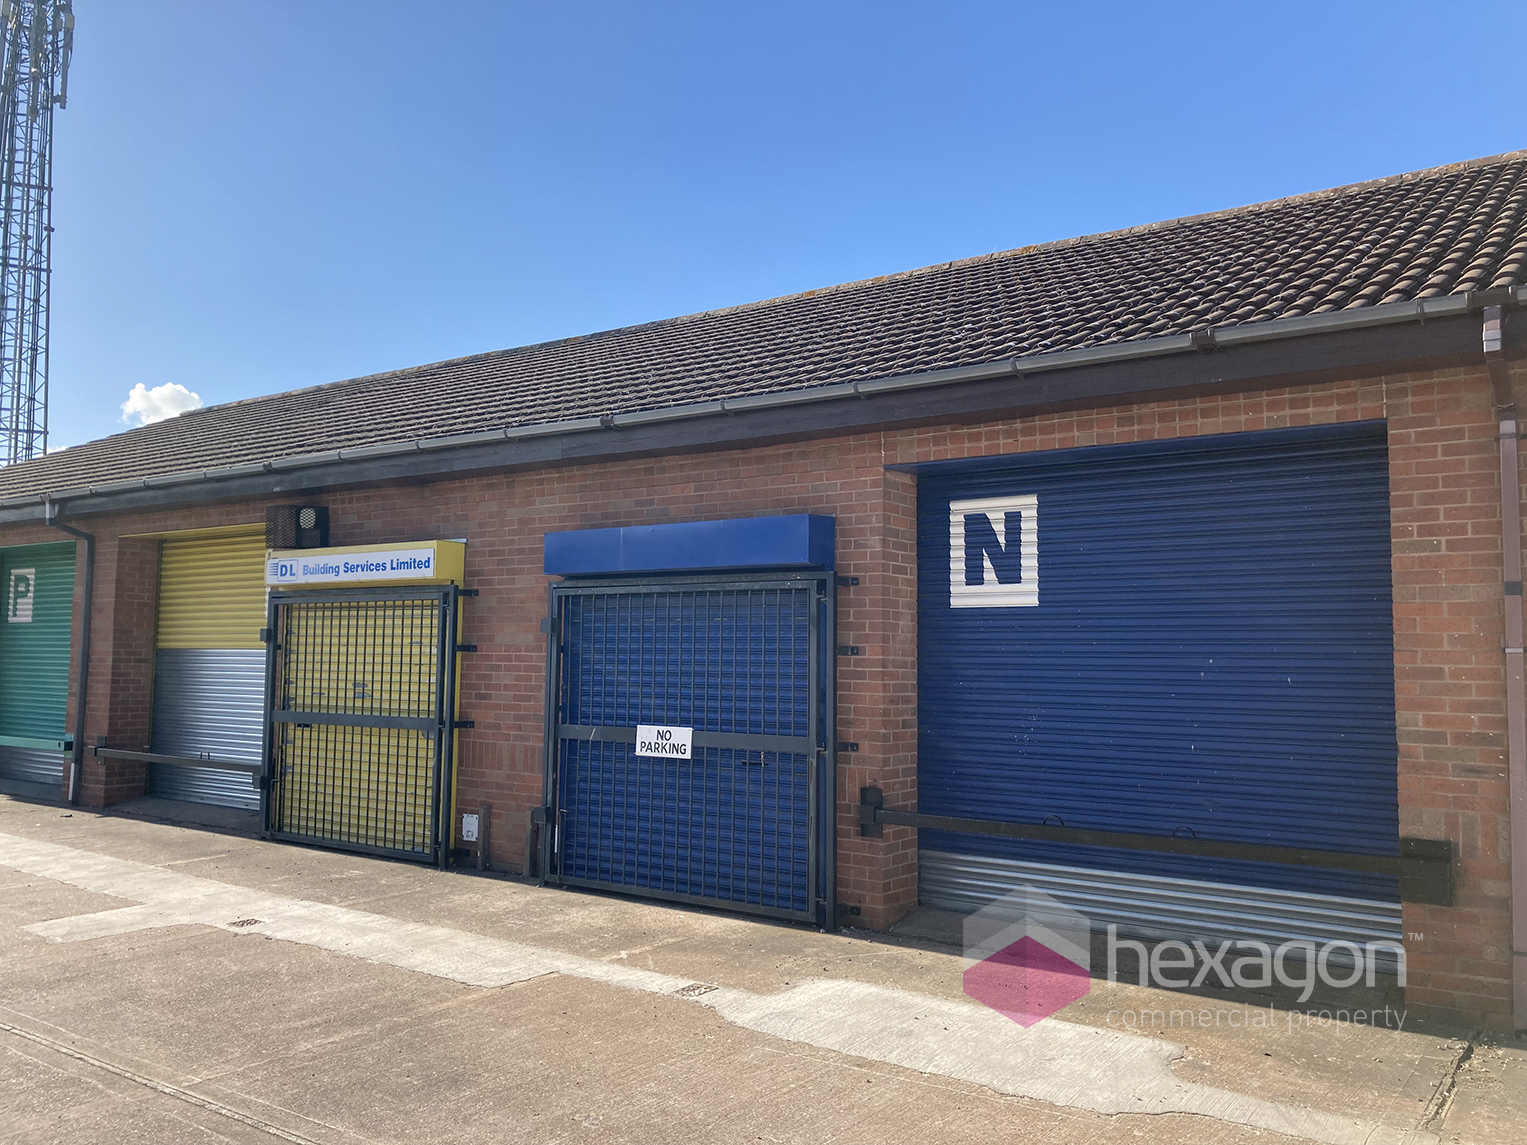 0 bed Light Industrial for rent in Brierley Hill. From Hexagon Commercial Property